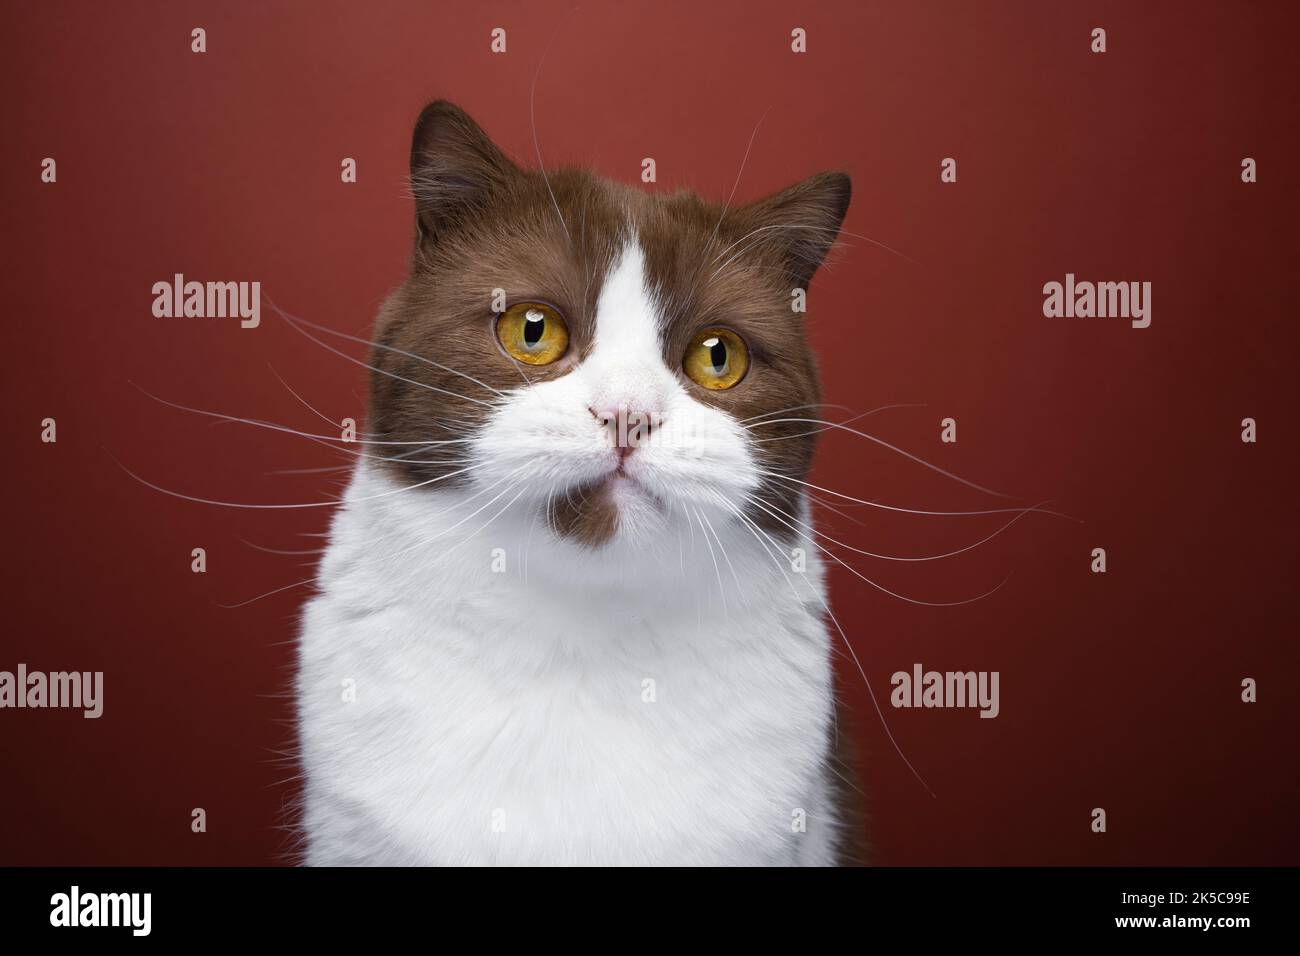 brown white british shorthair cat with yellow eyes portrait on red background Stock Photo